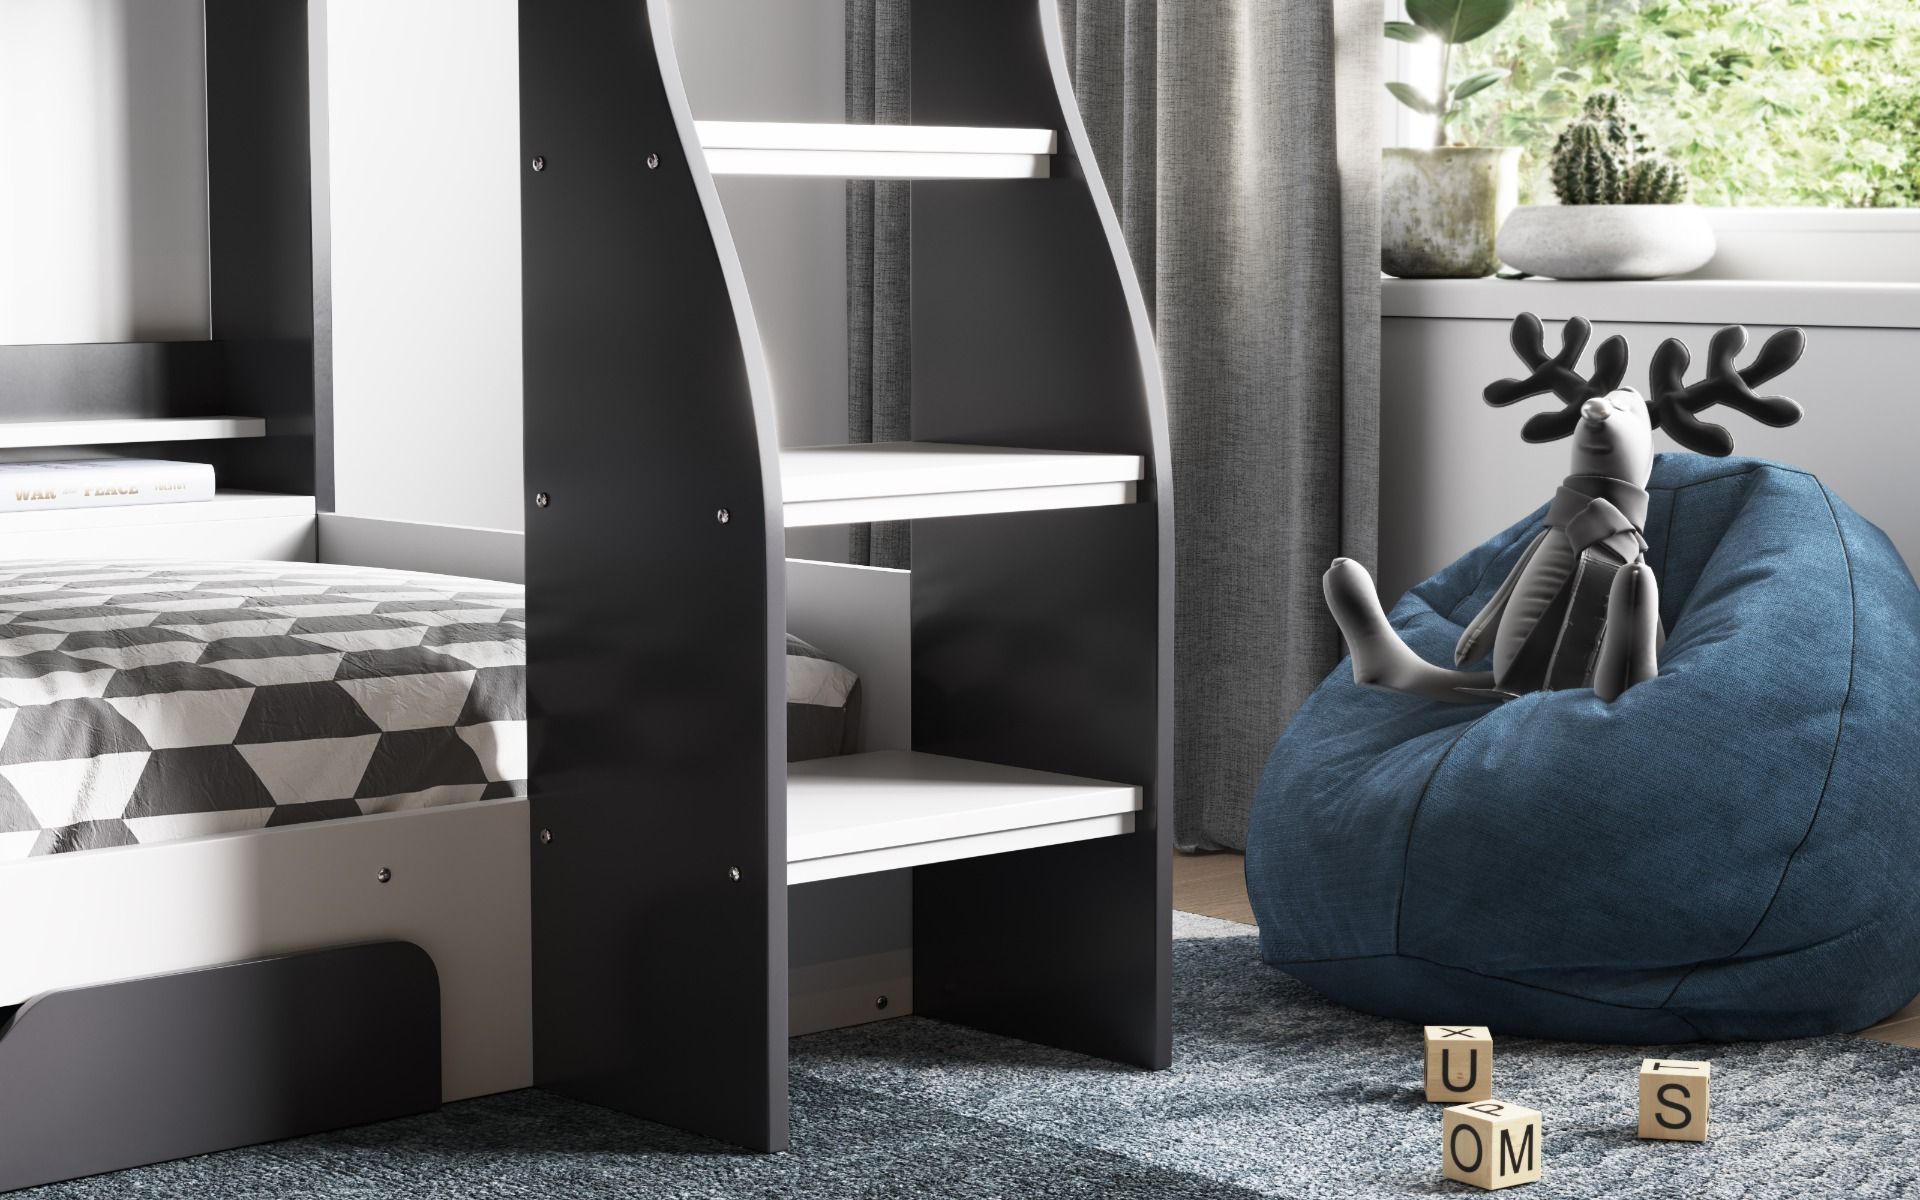 Flair Flick Bunk Bed with Shelves And Drawer - Grey